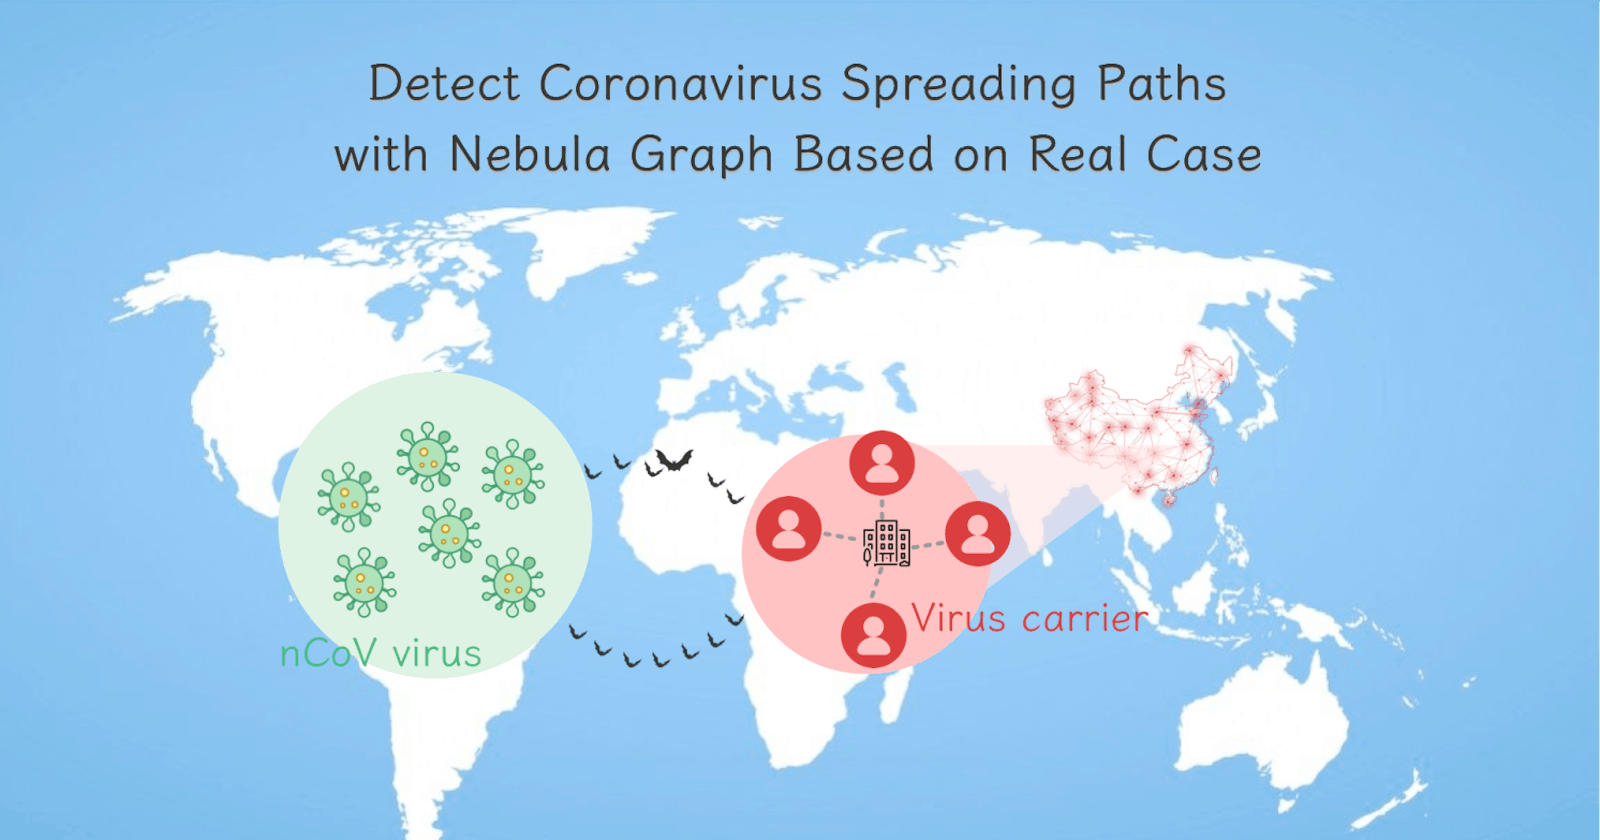 Detect Corona Virus Spreading With Graph Database Based on a Real Case